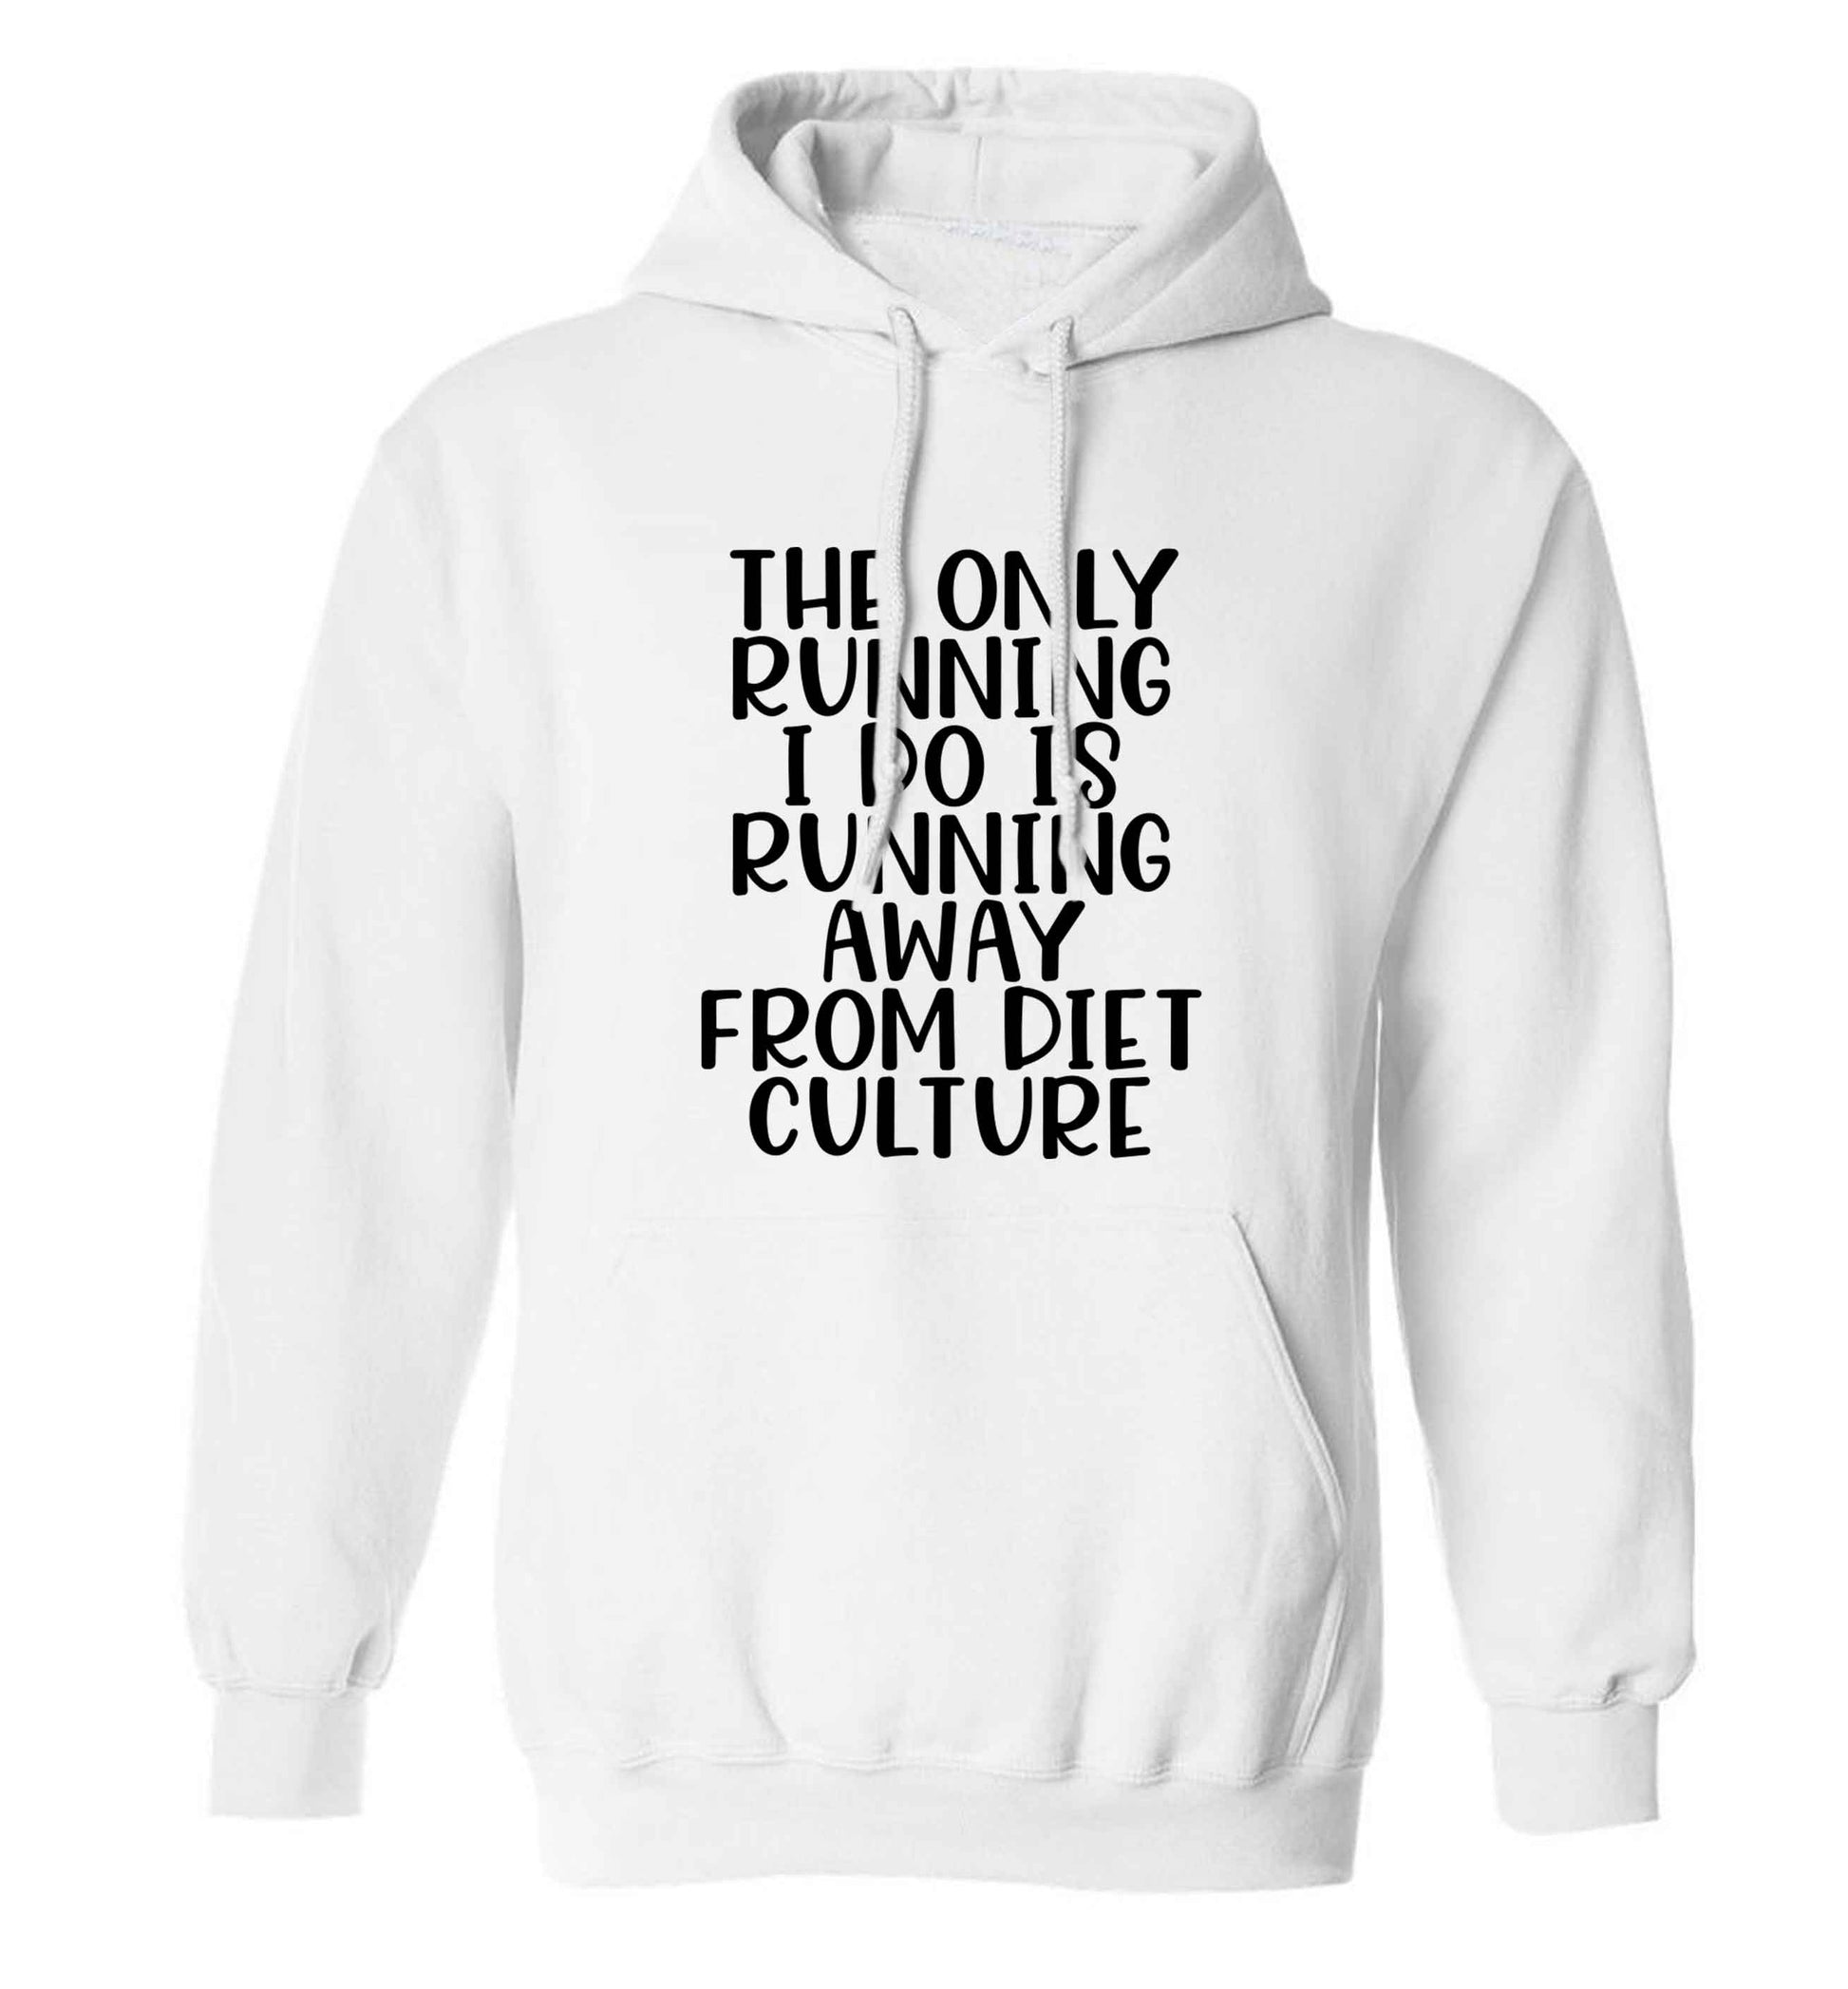 The only running I do is running away from diet culture adults unisex white hoodie 2XL